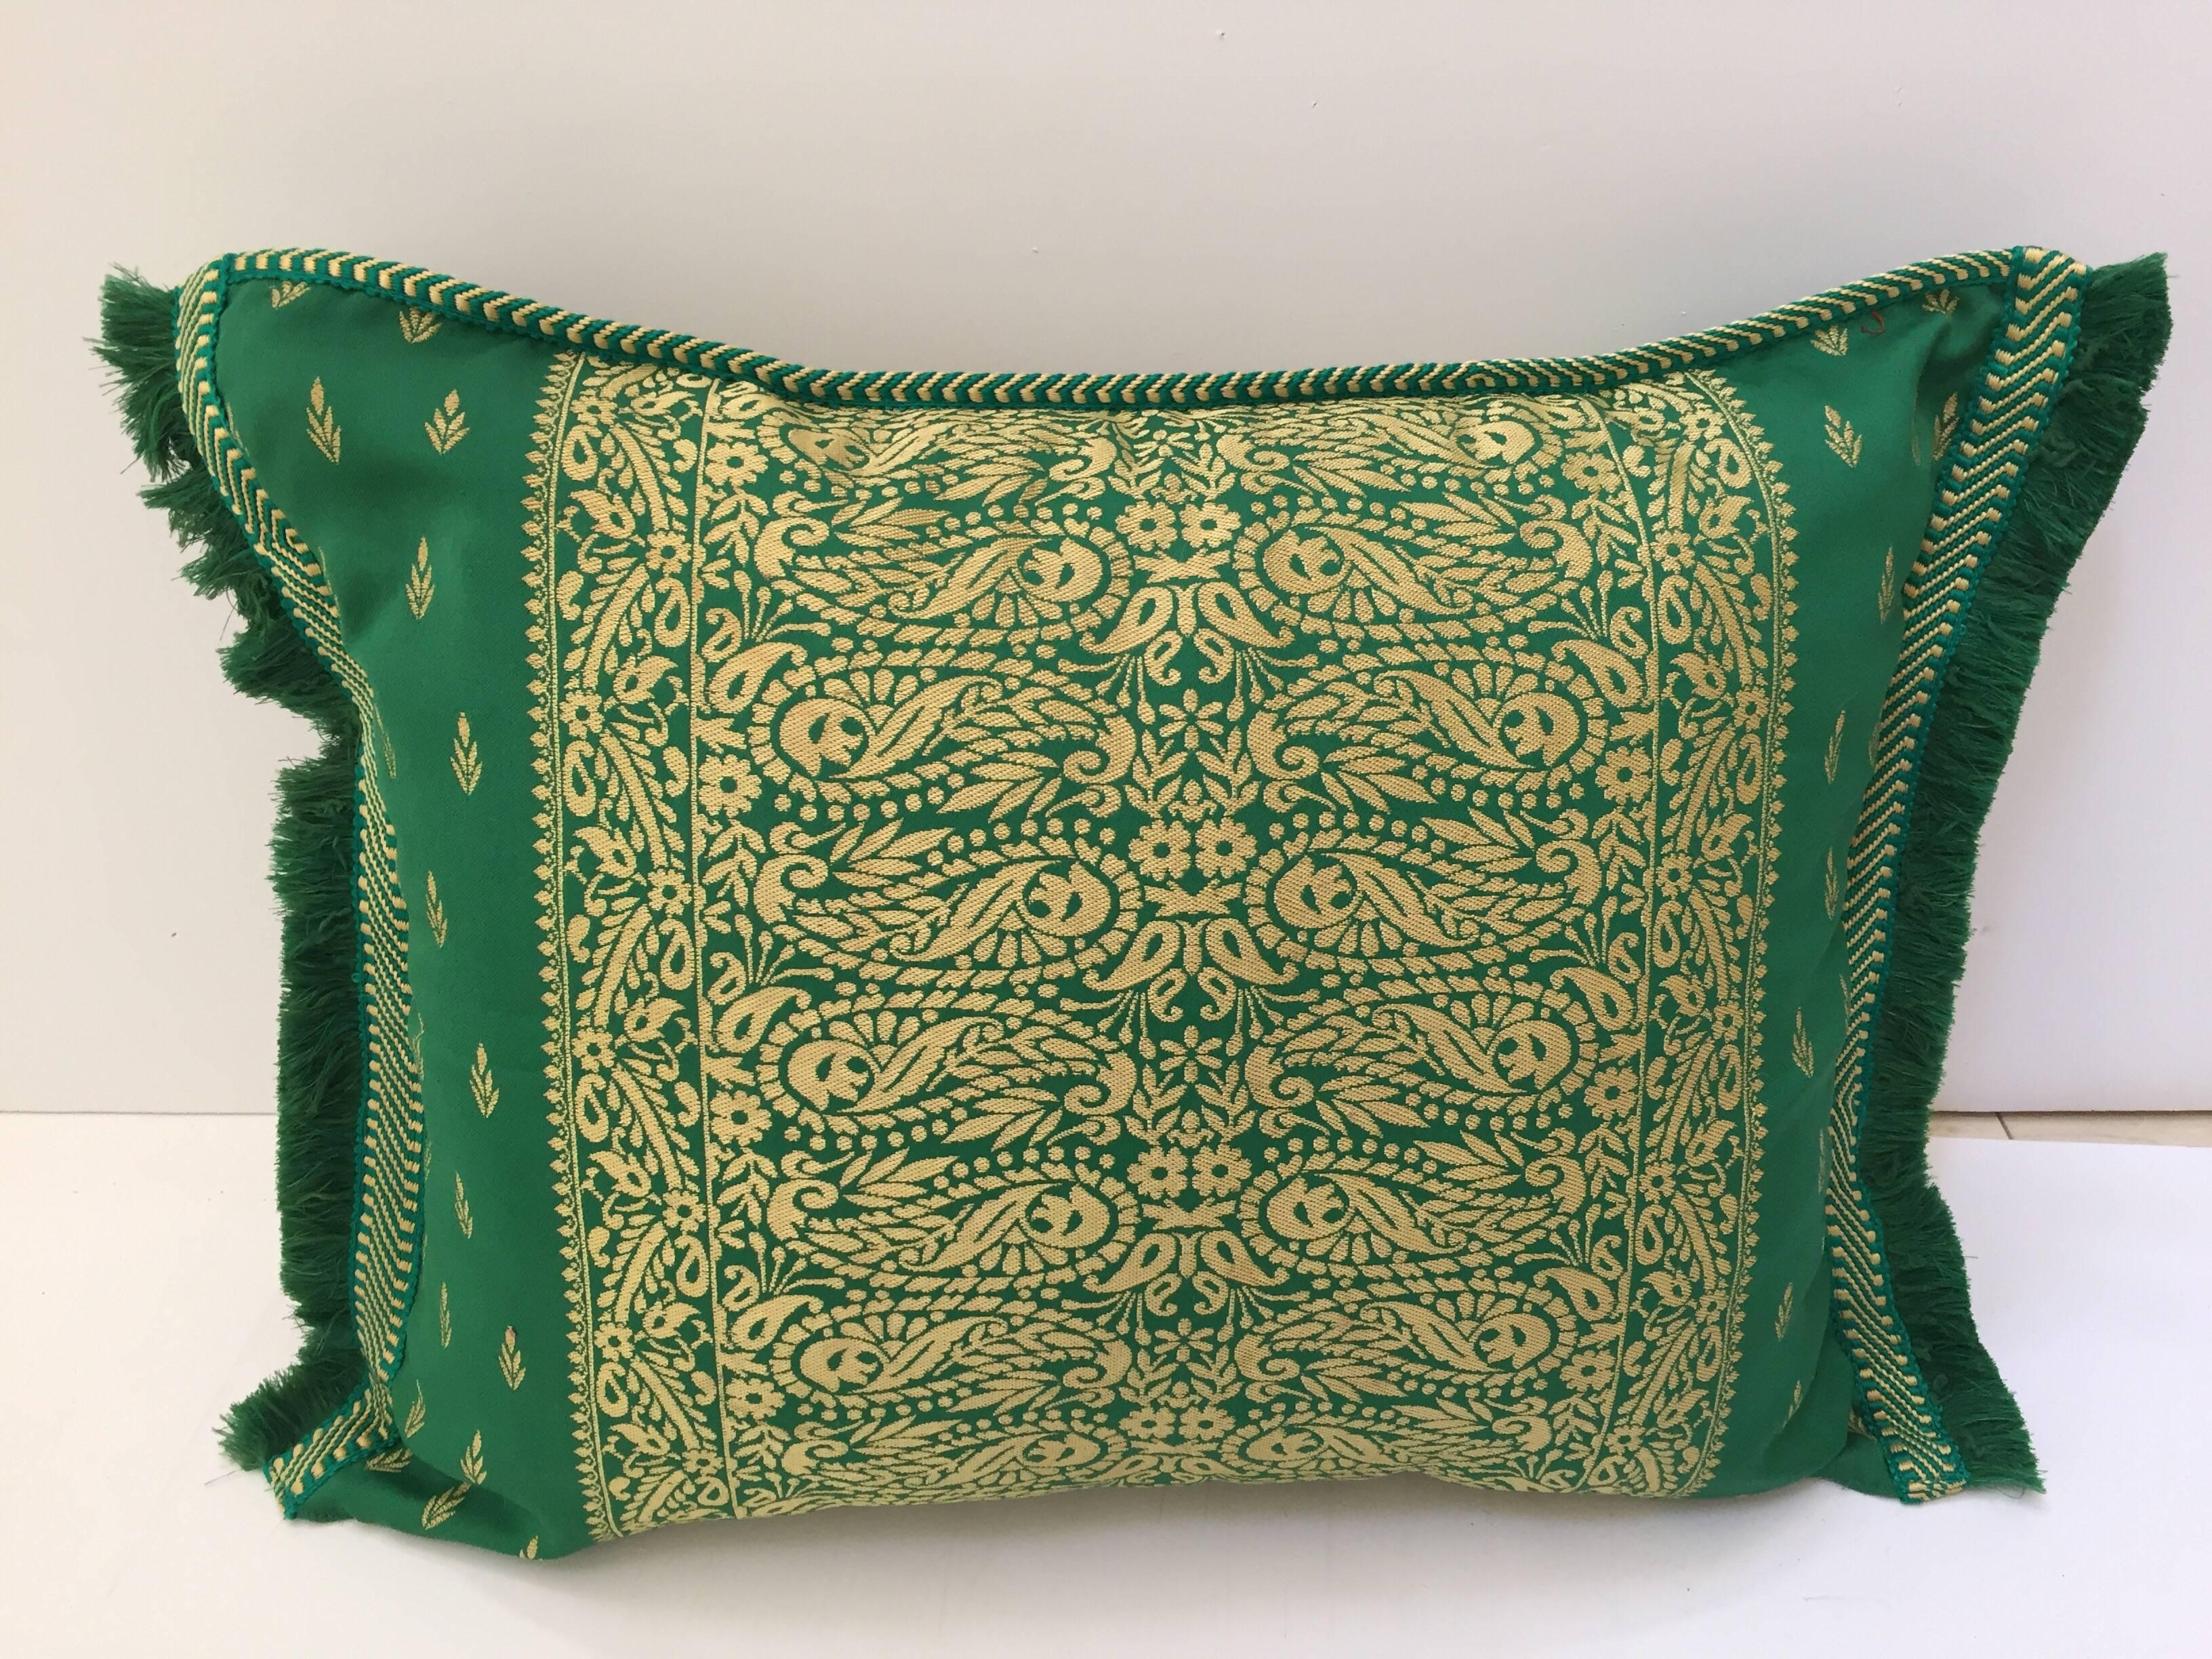 Large pair of Moroccan Damask green floral bolster lumbar decorative pillows.
Great to use as accent pillows on a bed or sofa throw pillows.
Pillow has a beautiful center medallion, detailed corners, fringe edges trim.
Bohemian Moorish Venetian